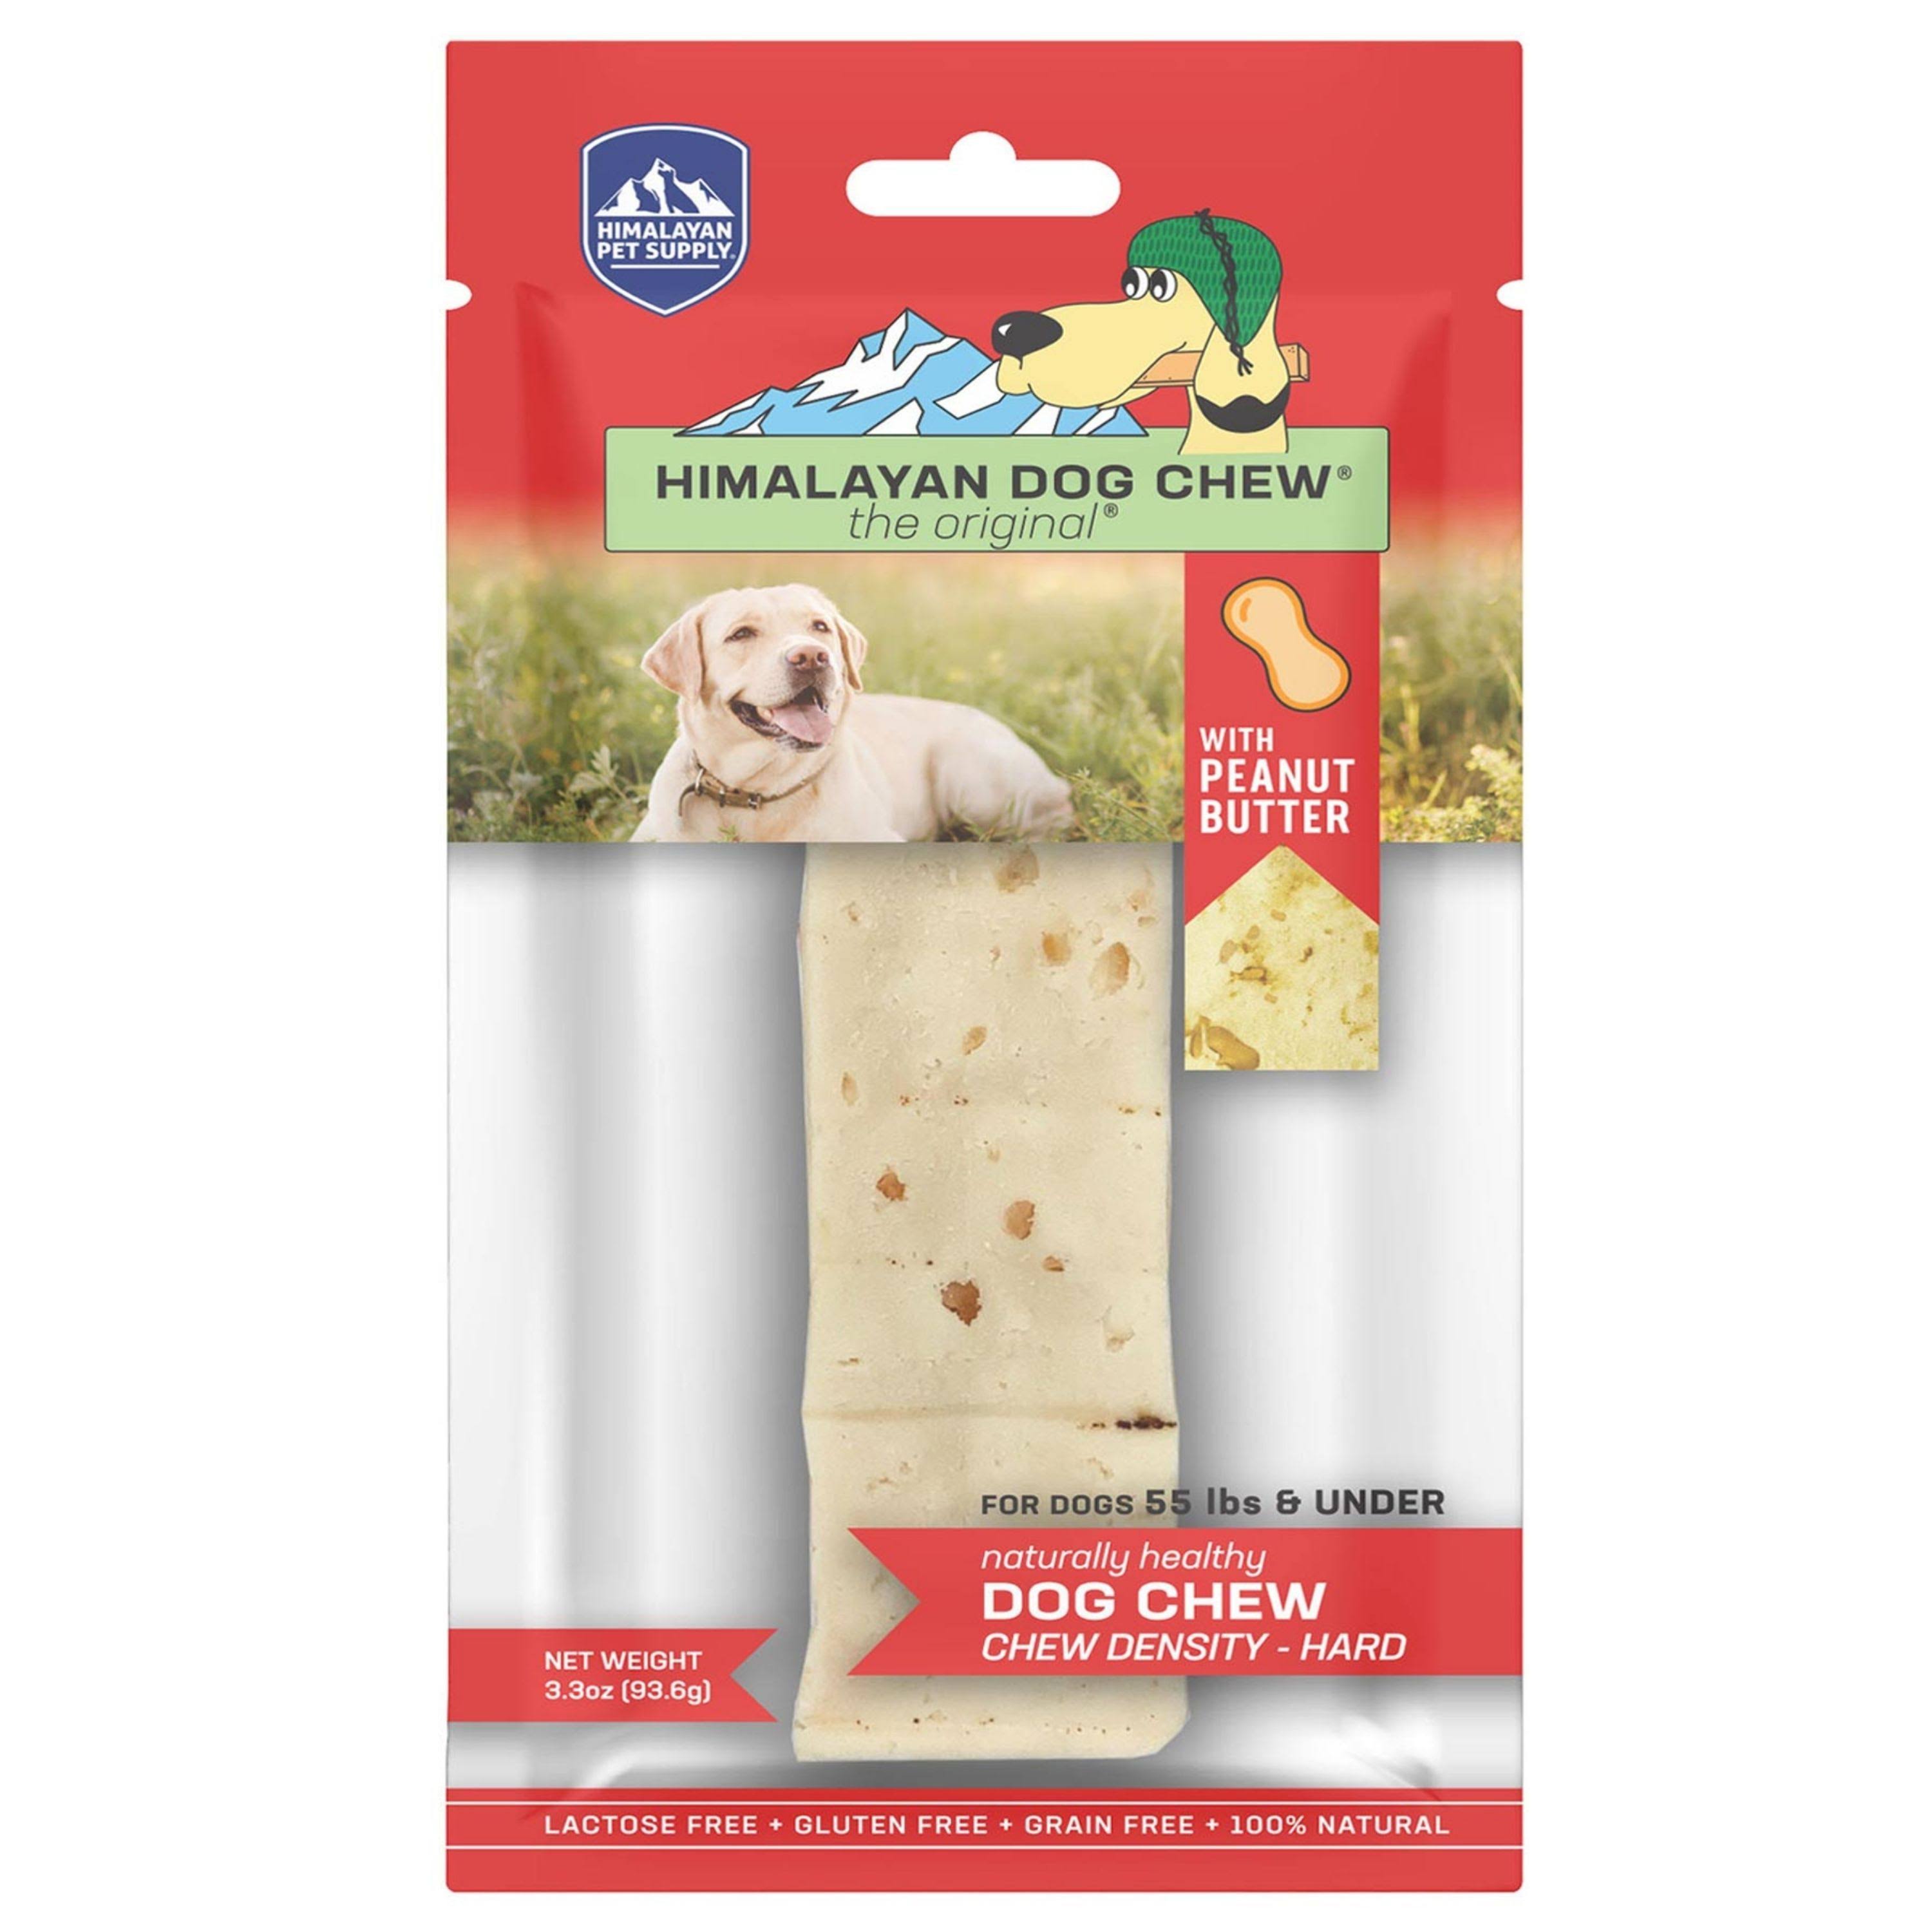 Himalayan Dog Chew With Peanut Butter - Large (1 Pack) (Dog Treat)